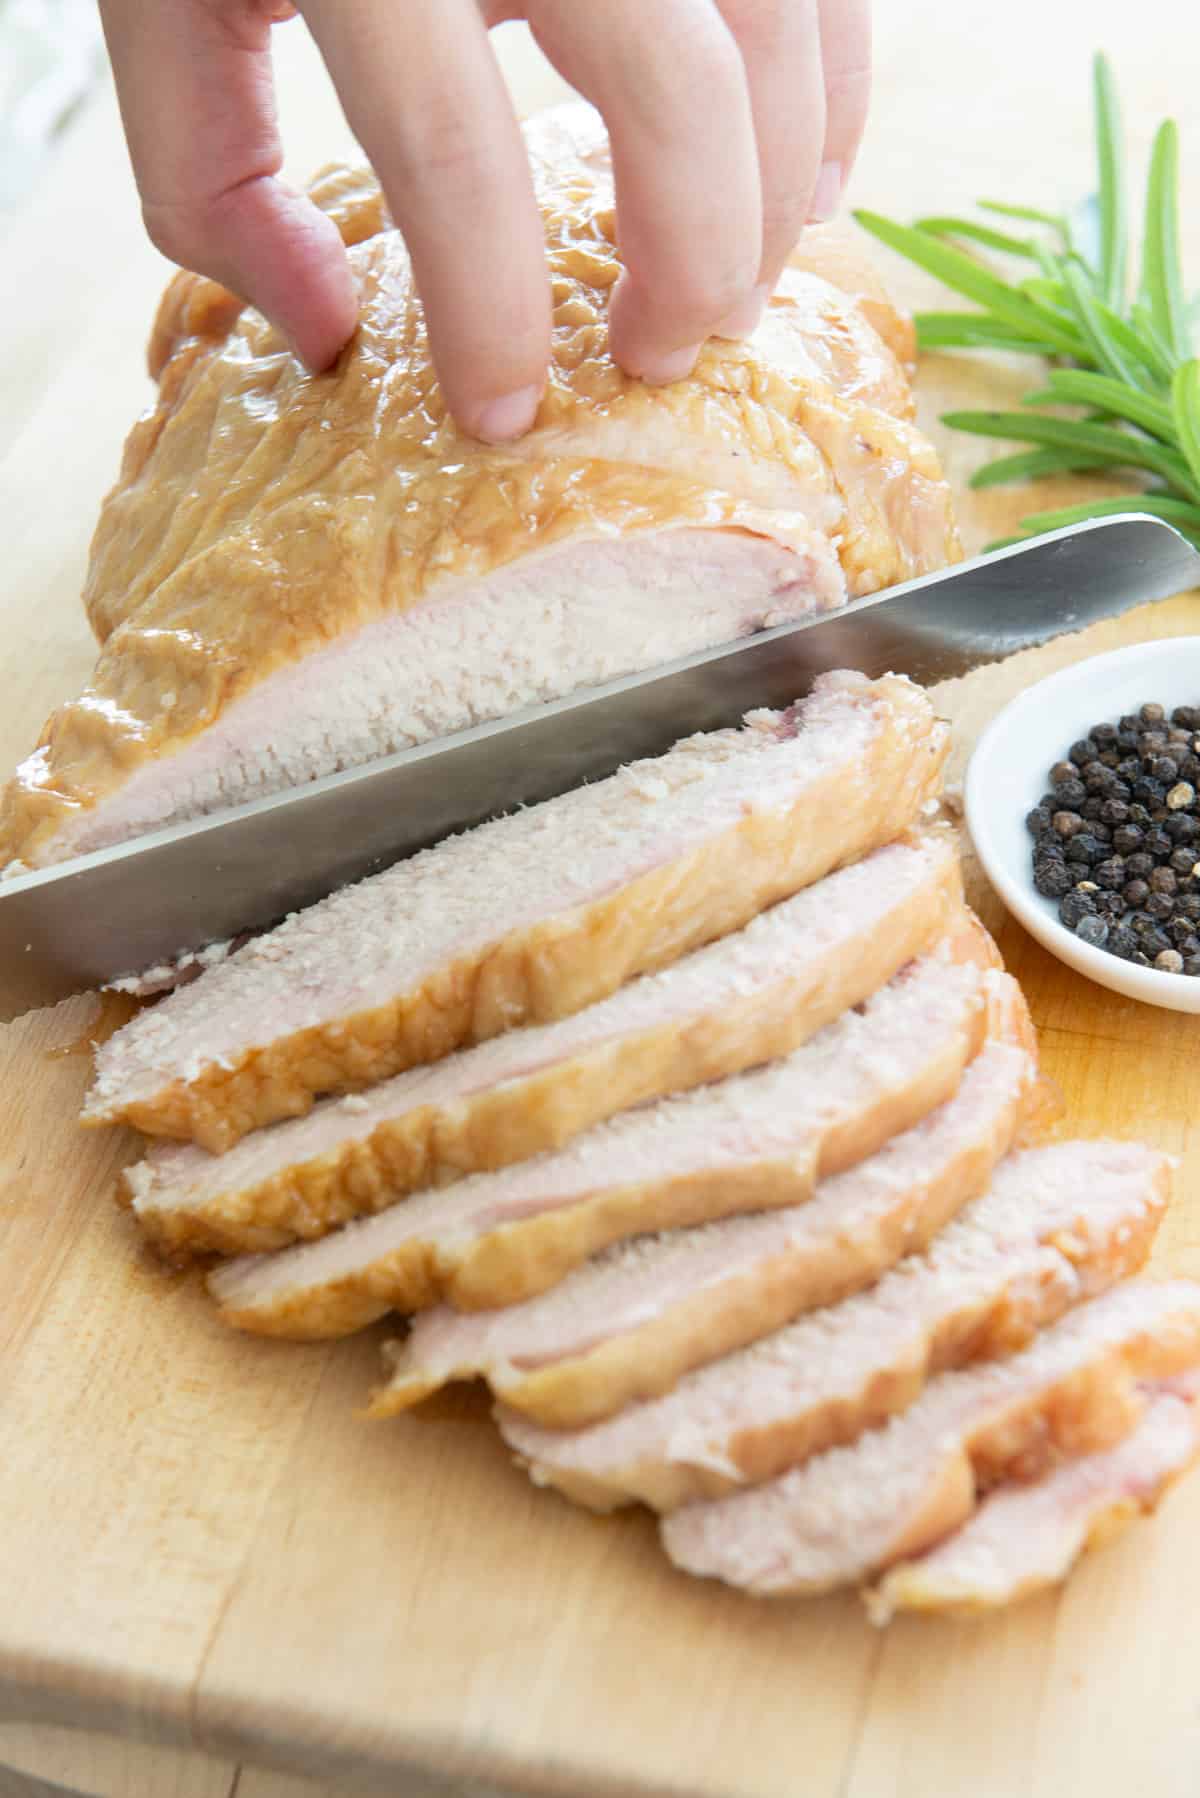 Slicing Smoked Turkey Breast On Wooden Cutting Board With Serrated Knife